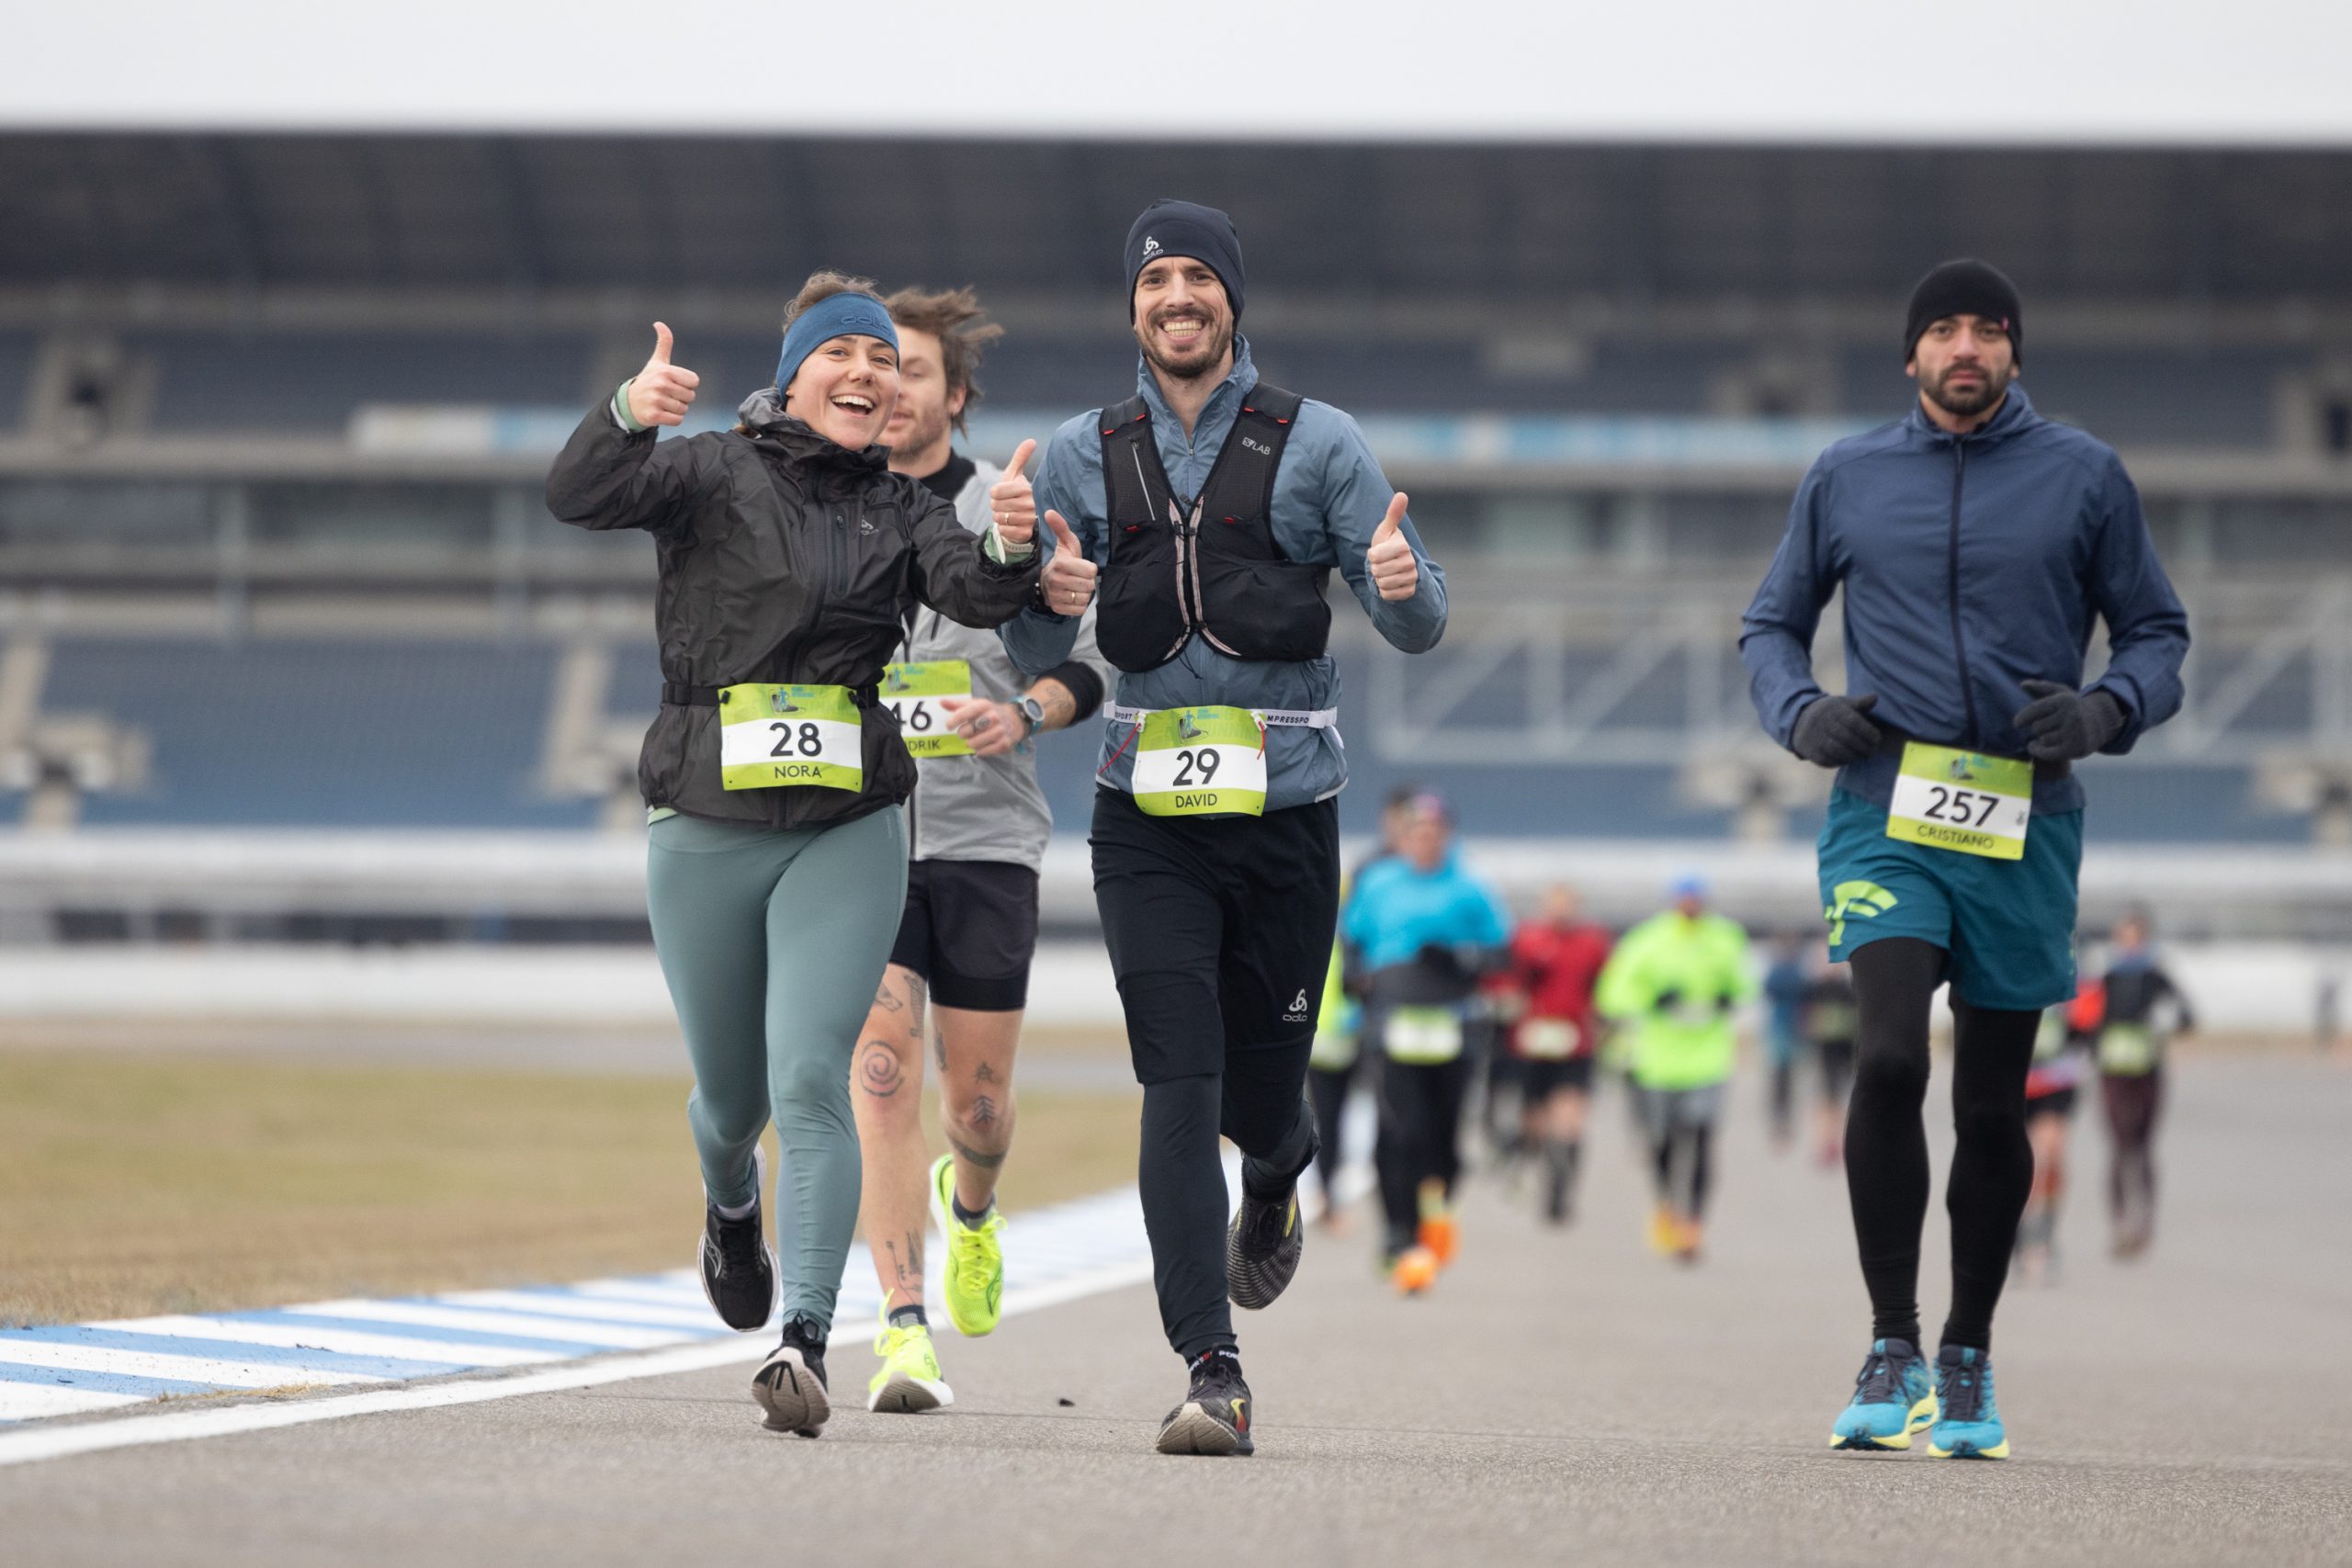 New course record in the Ring Running Series – this was the 4th edition at the Hockenheimring